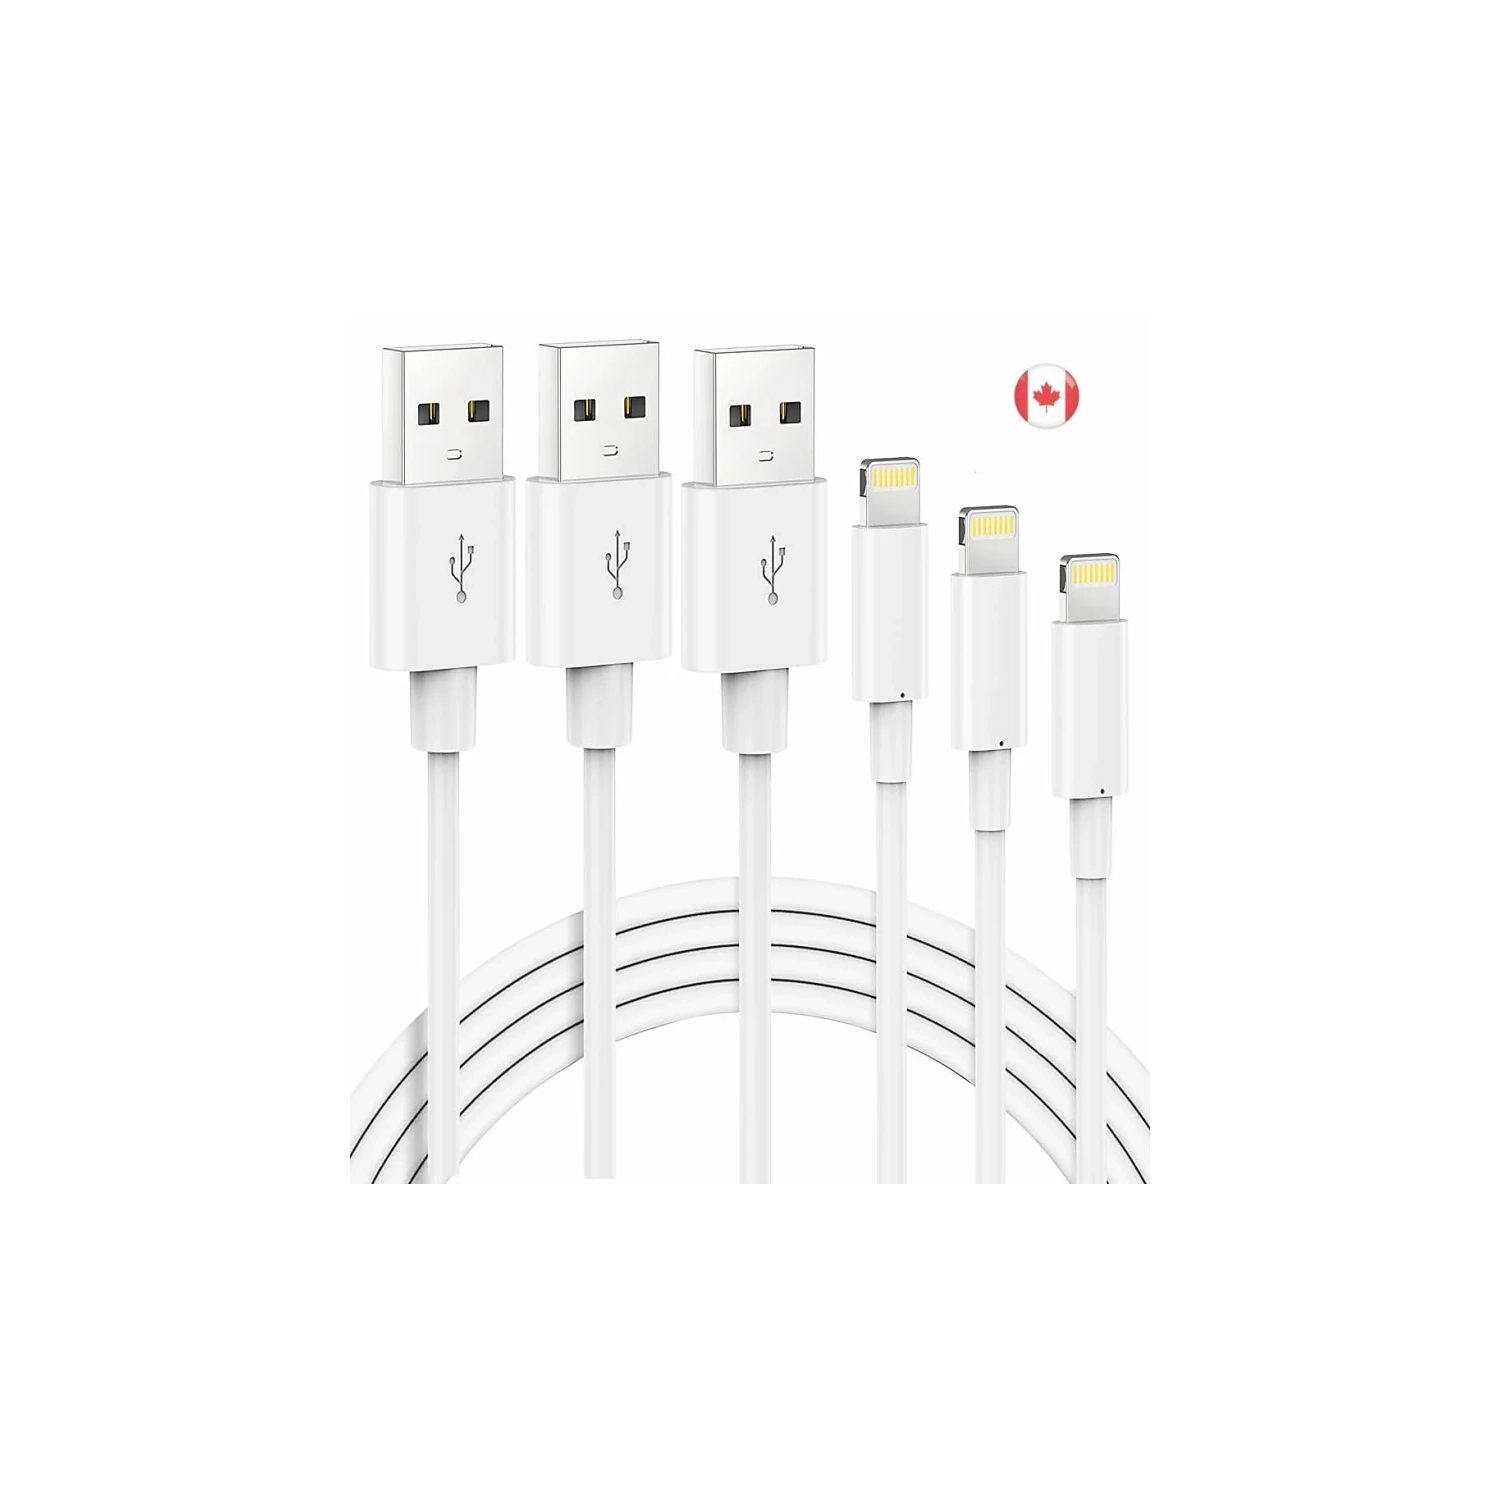 MFi Certified Lightning Cable - 3 Pack 3ft 6ft 10ft Long iPhone Charger Cord | Compatible with iPhone 14/13/12/11 Pro/XS Max/X/XR/8/7/6s/6 Plus/SE/5, iPad, iPod, AirPods Pro White